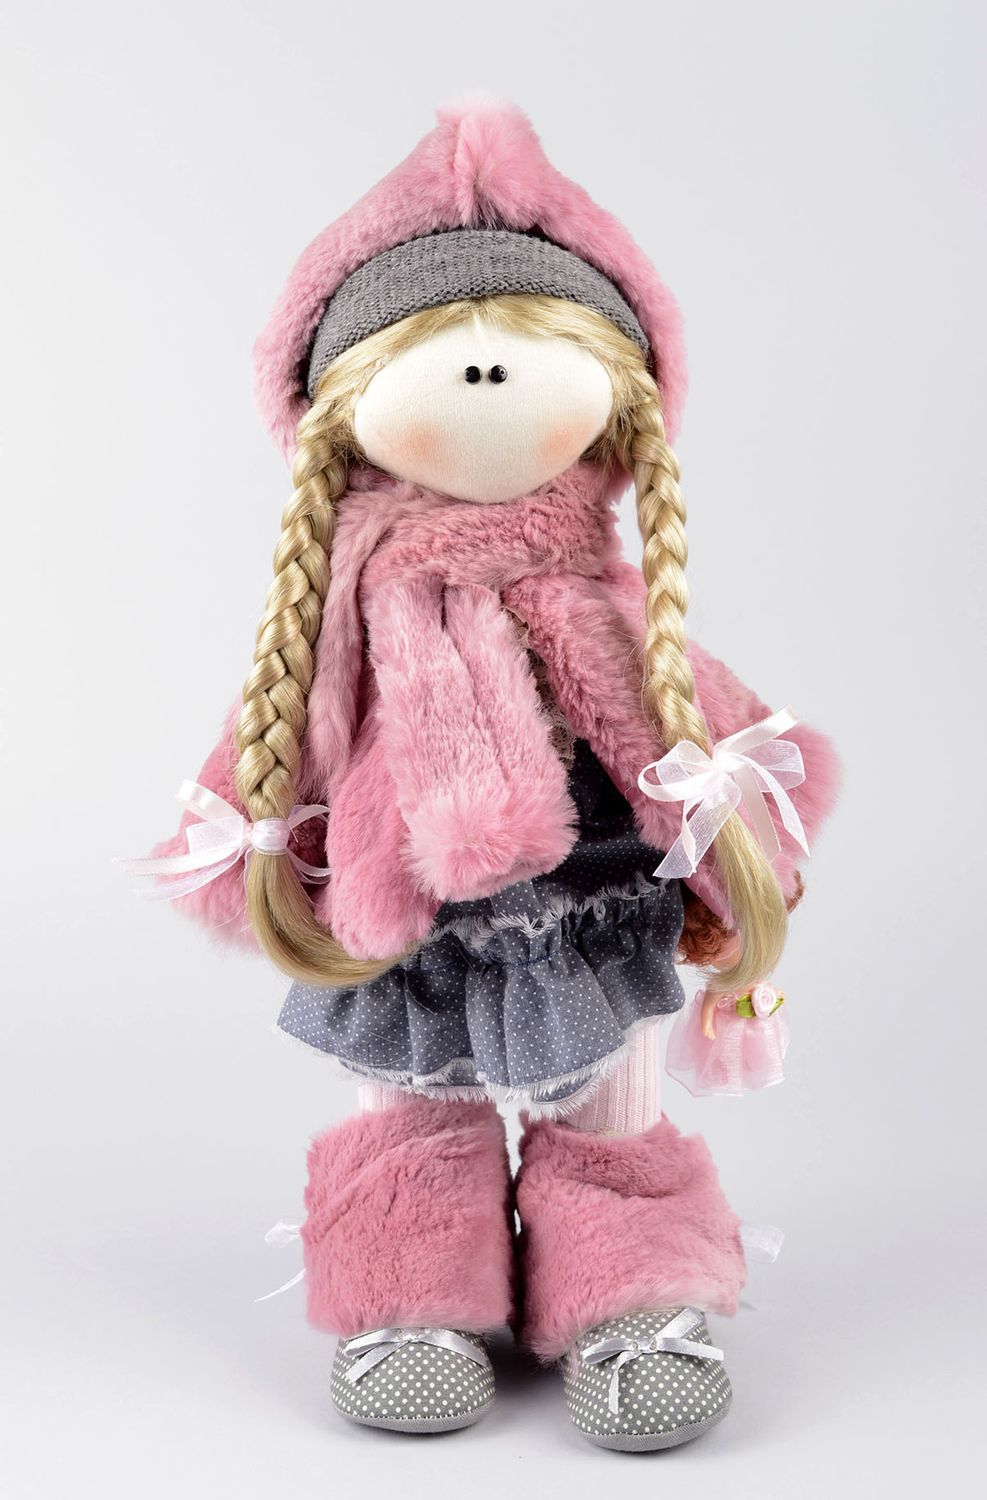 Handmade soft doll collectible doll toys for kids presents for girls home decor photo 1